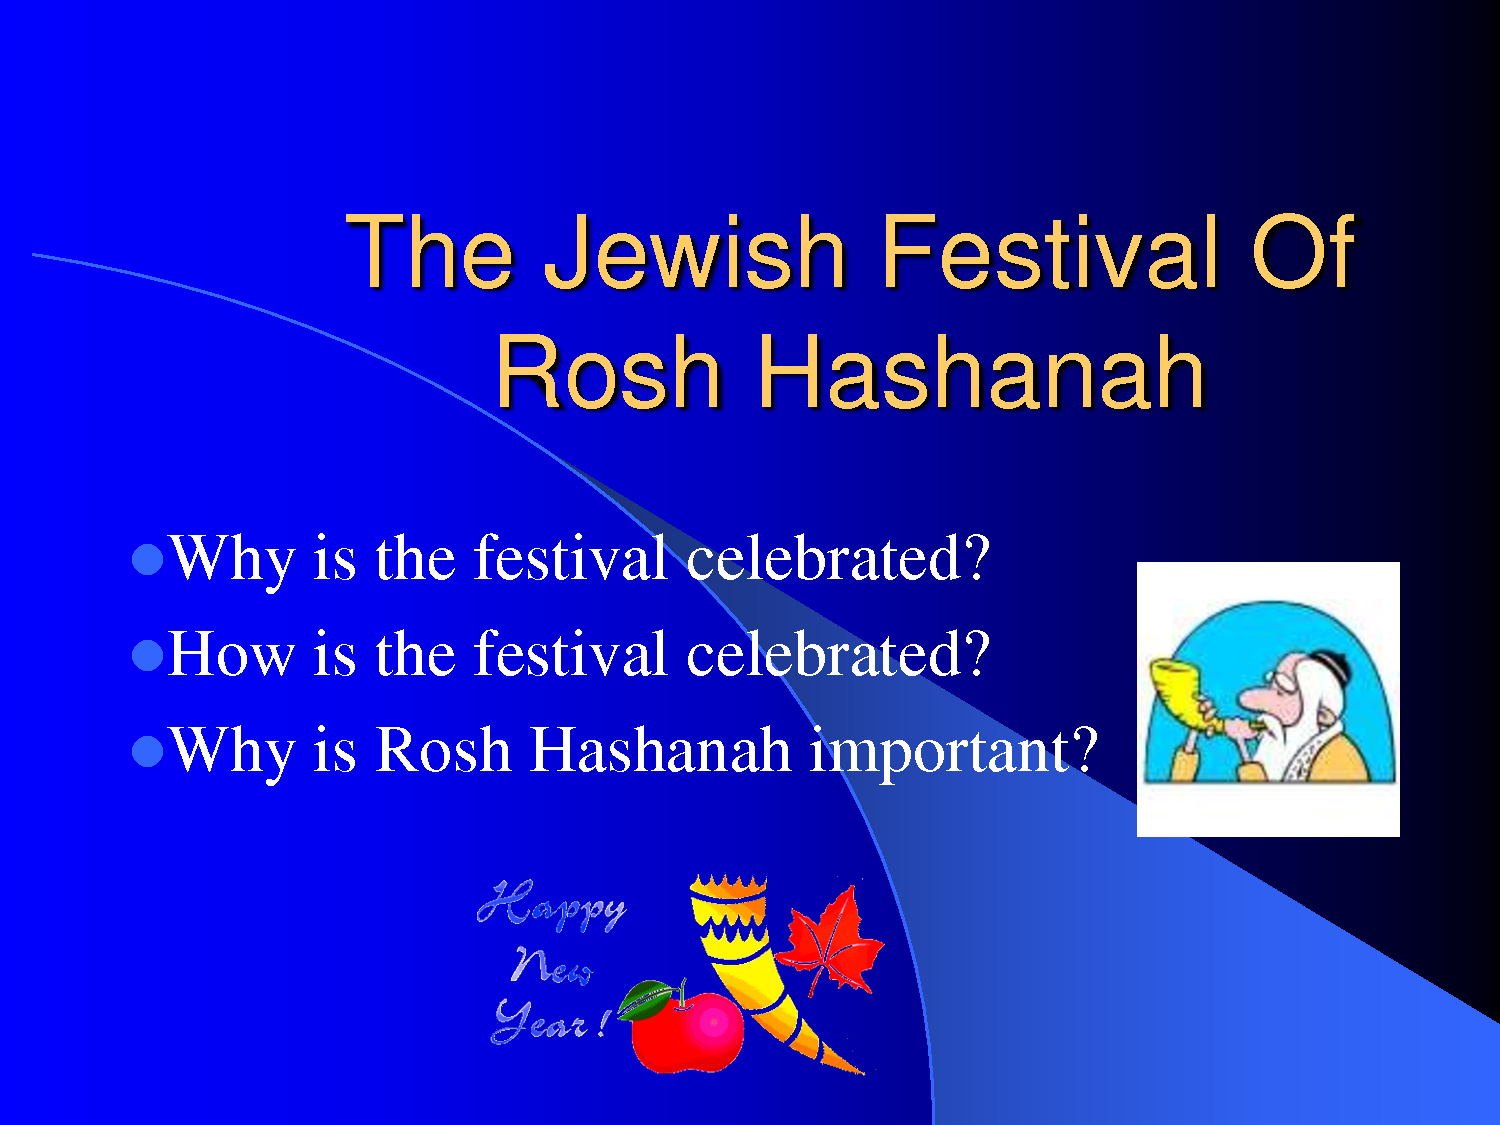 Happy Rosh Hashanah by terry1